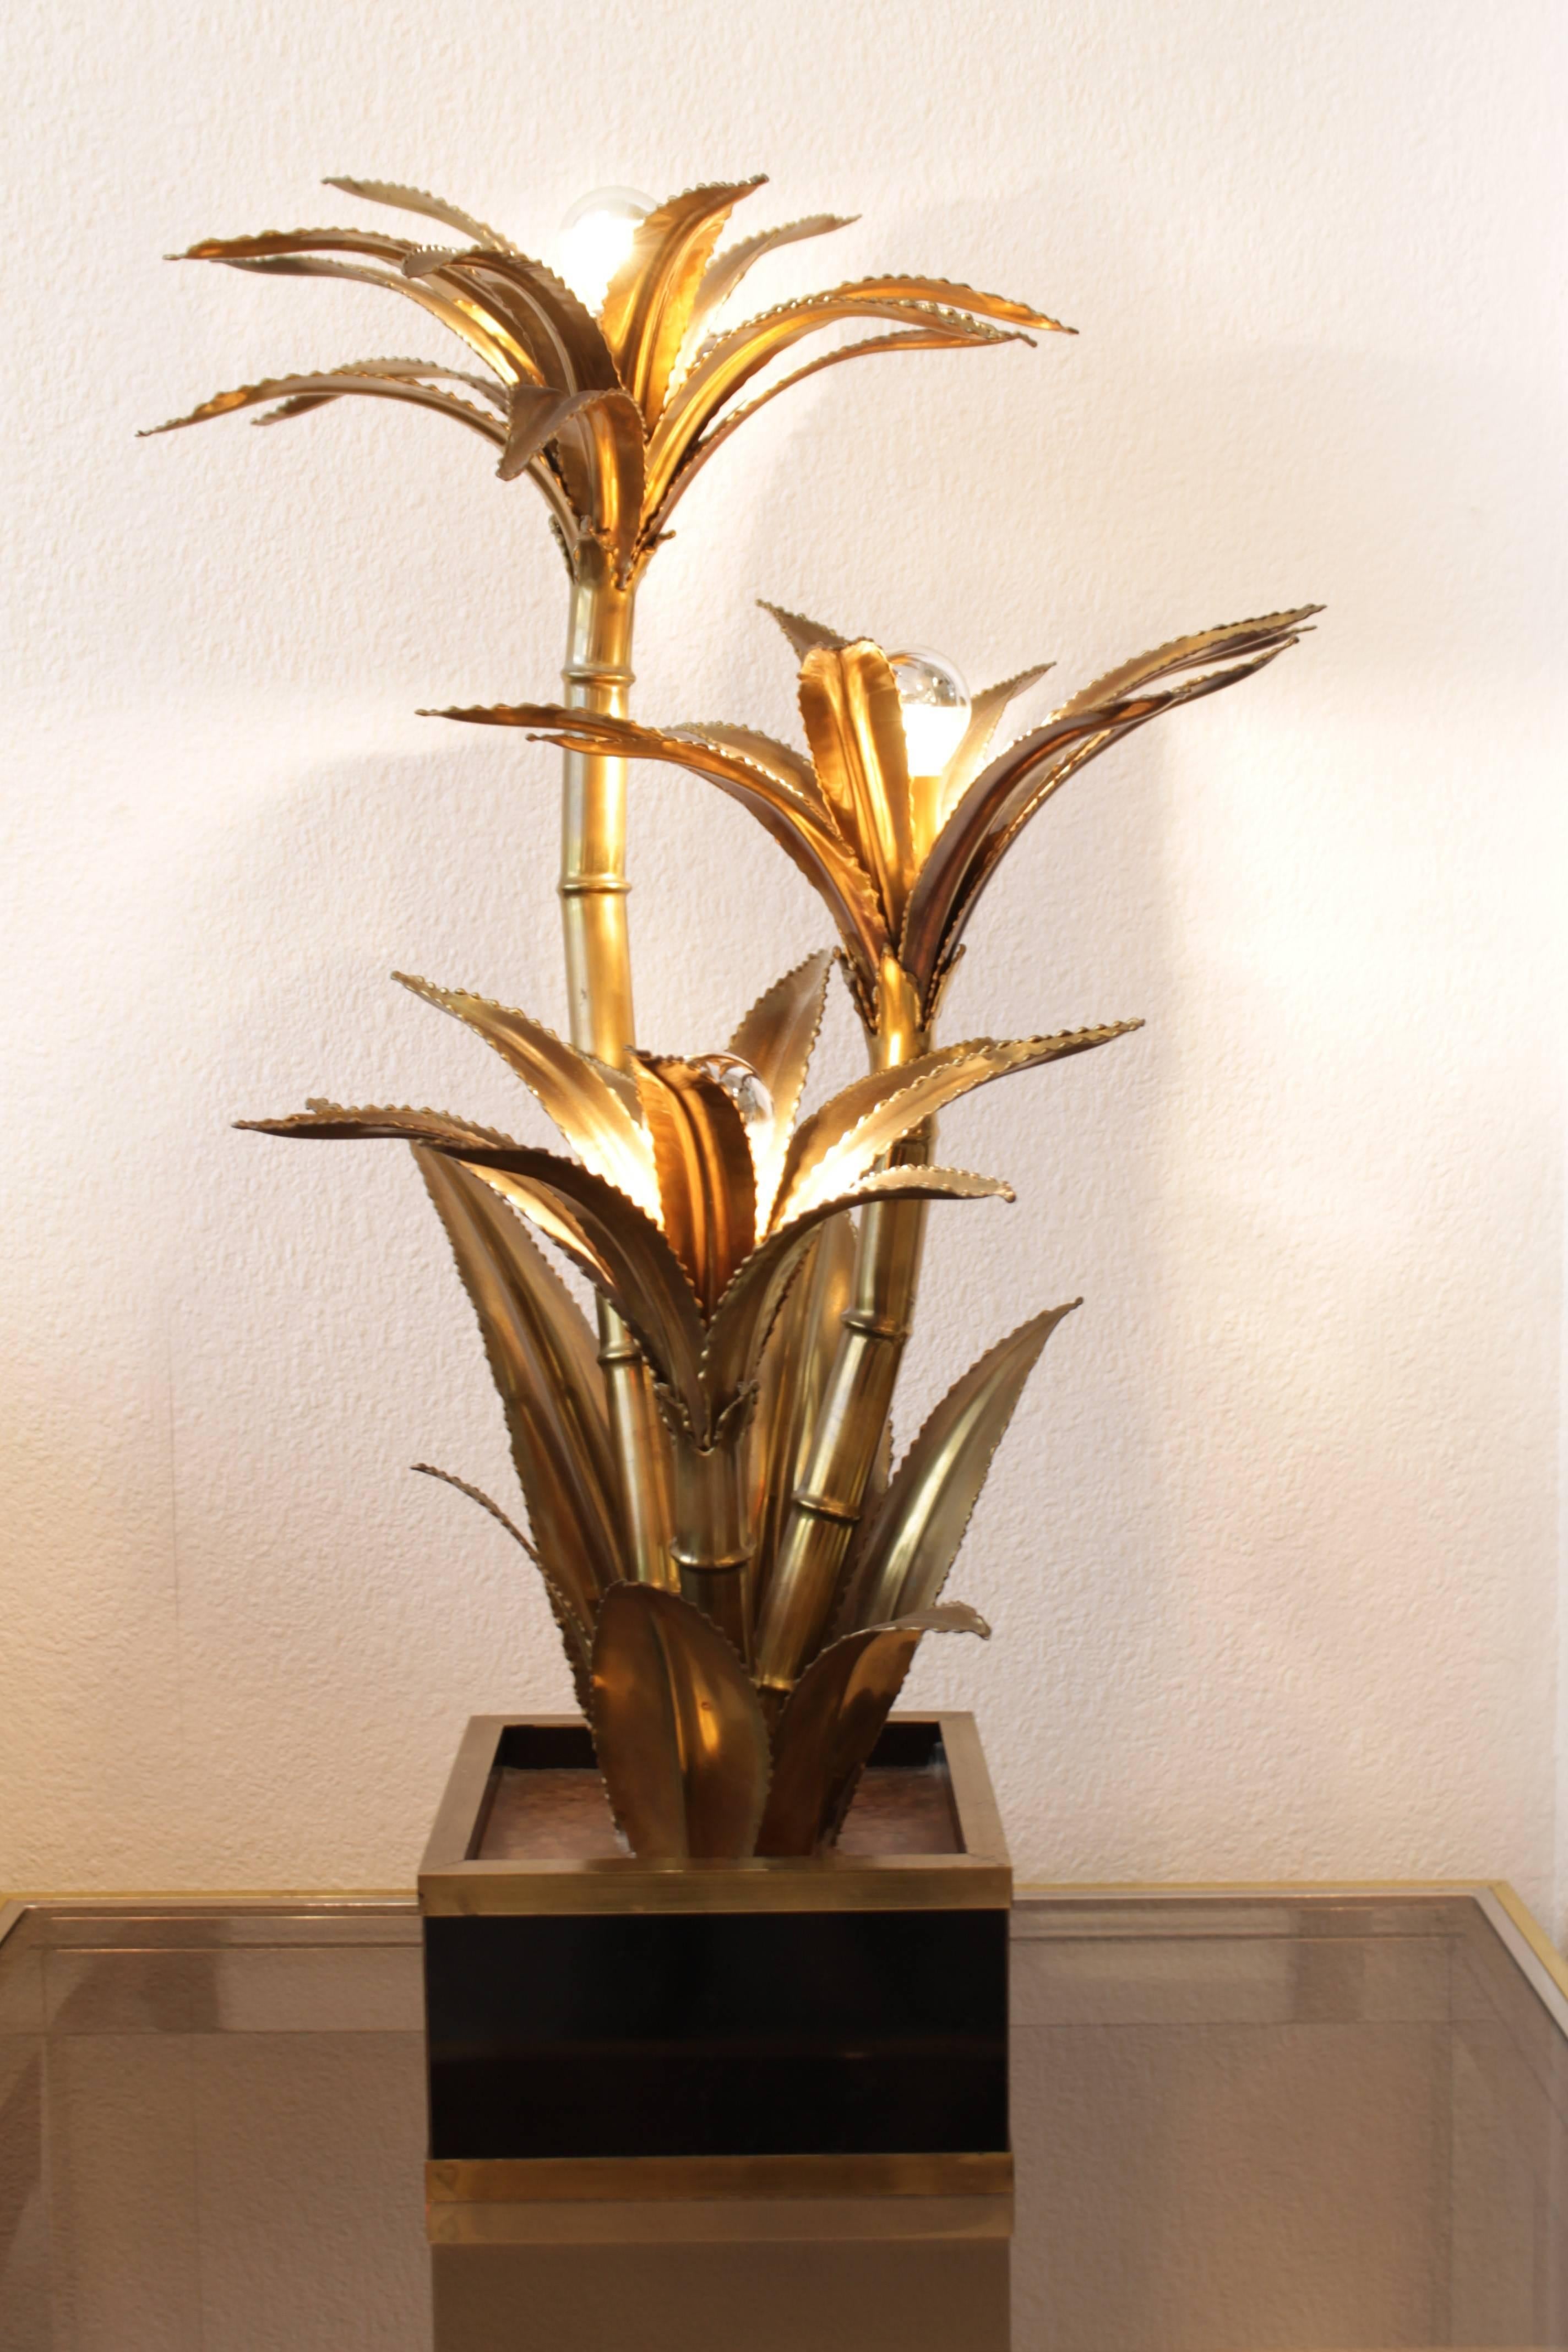 Brass palm tree table or floor lamp by Maison Jansen, France, circa 1970s
Perfect condition.